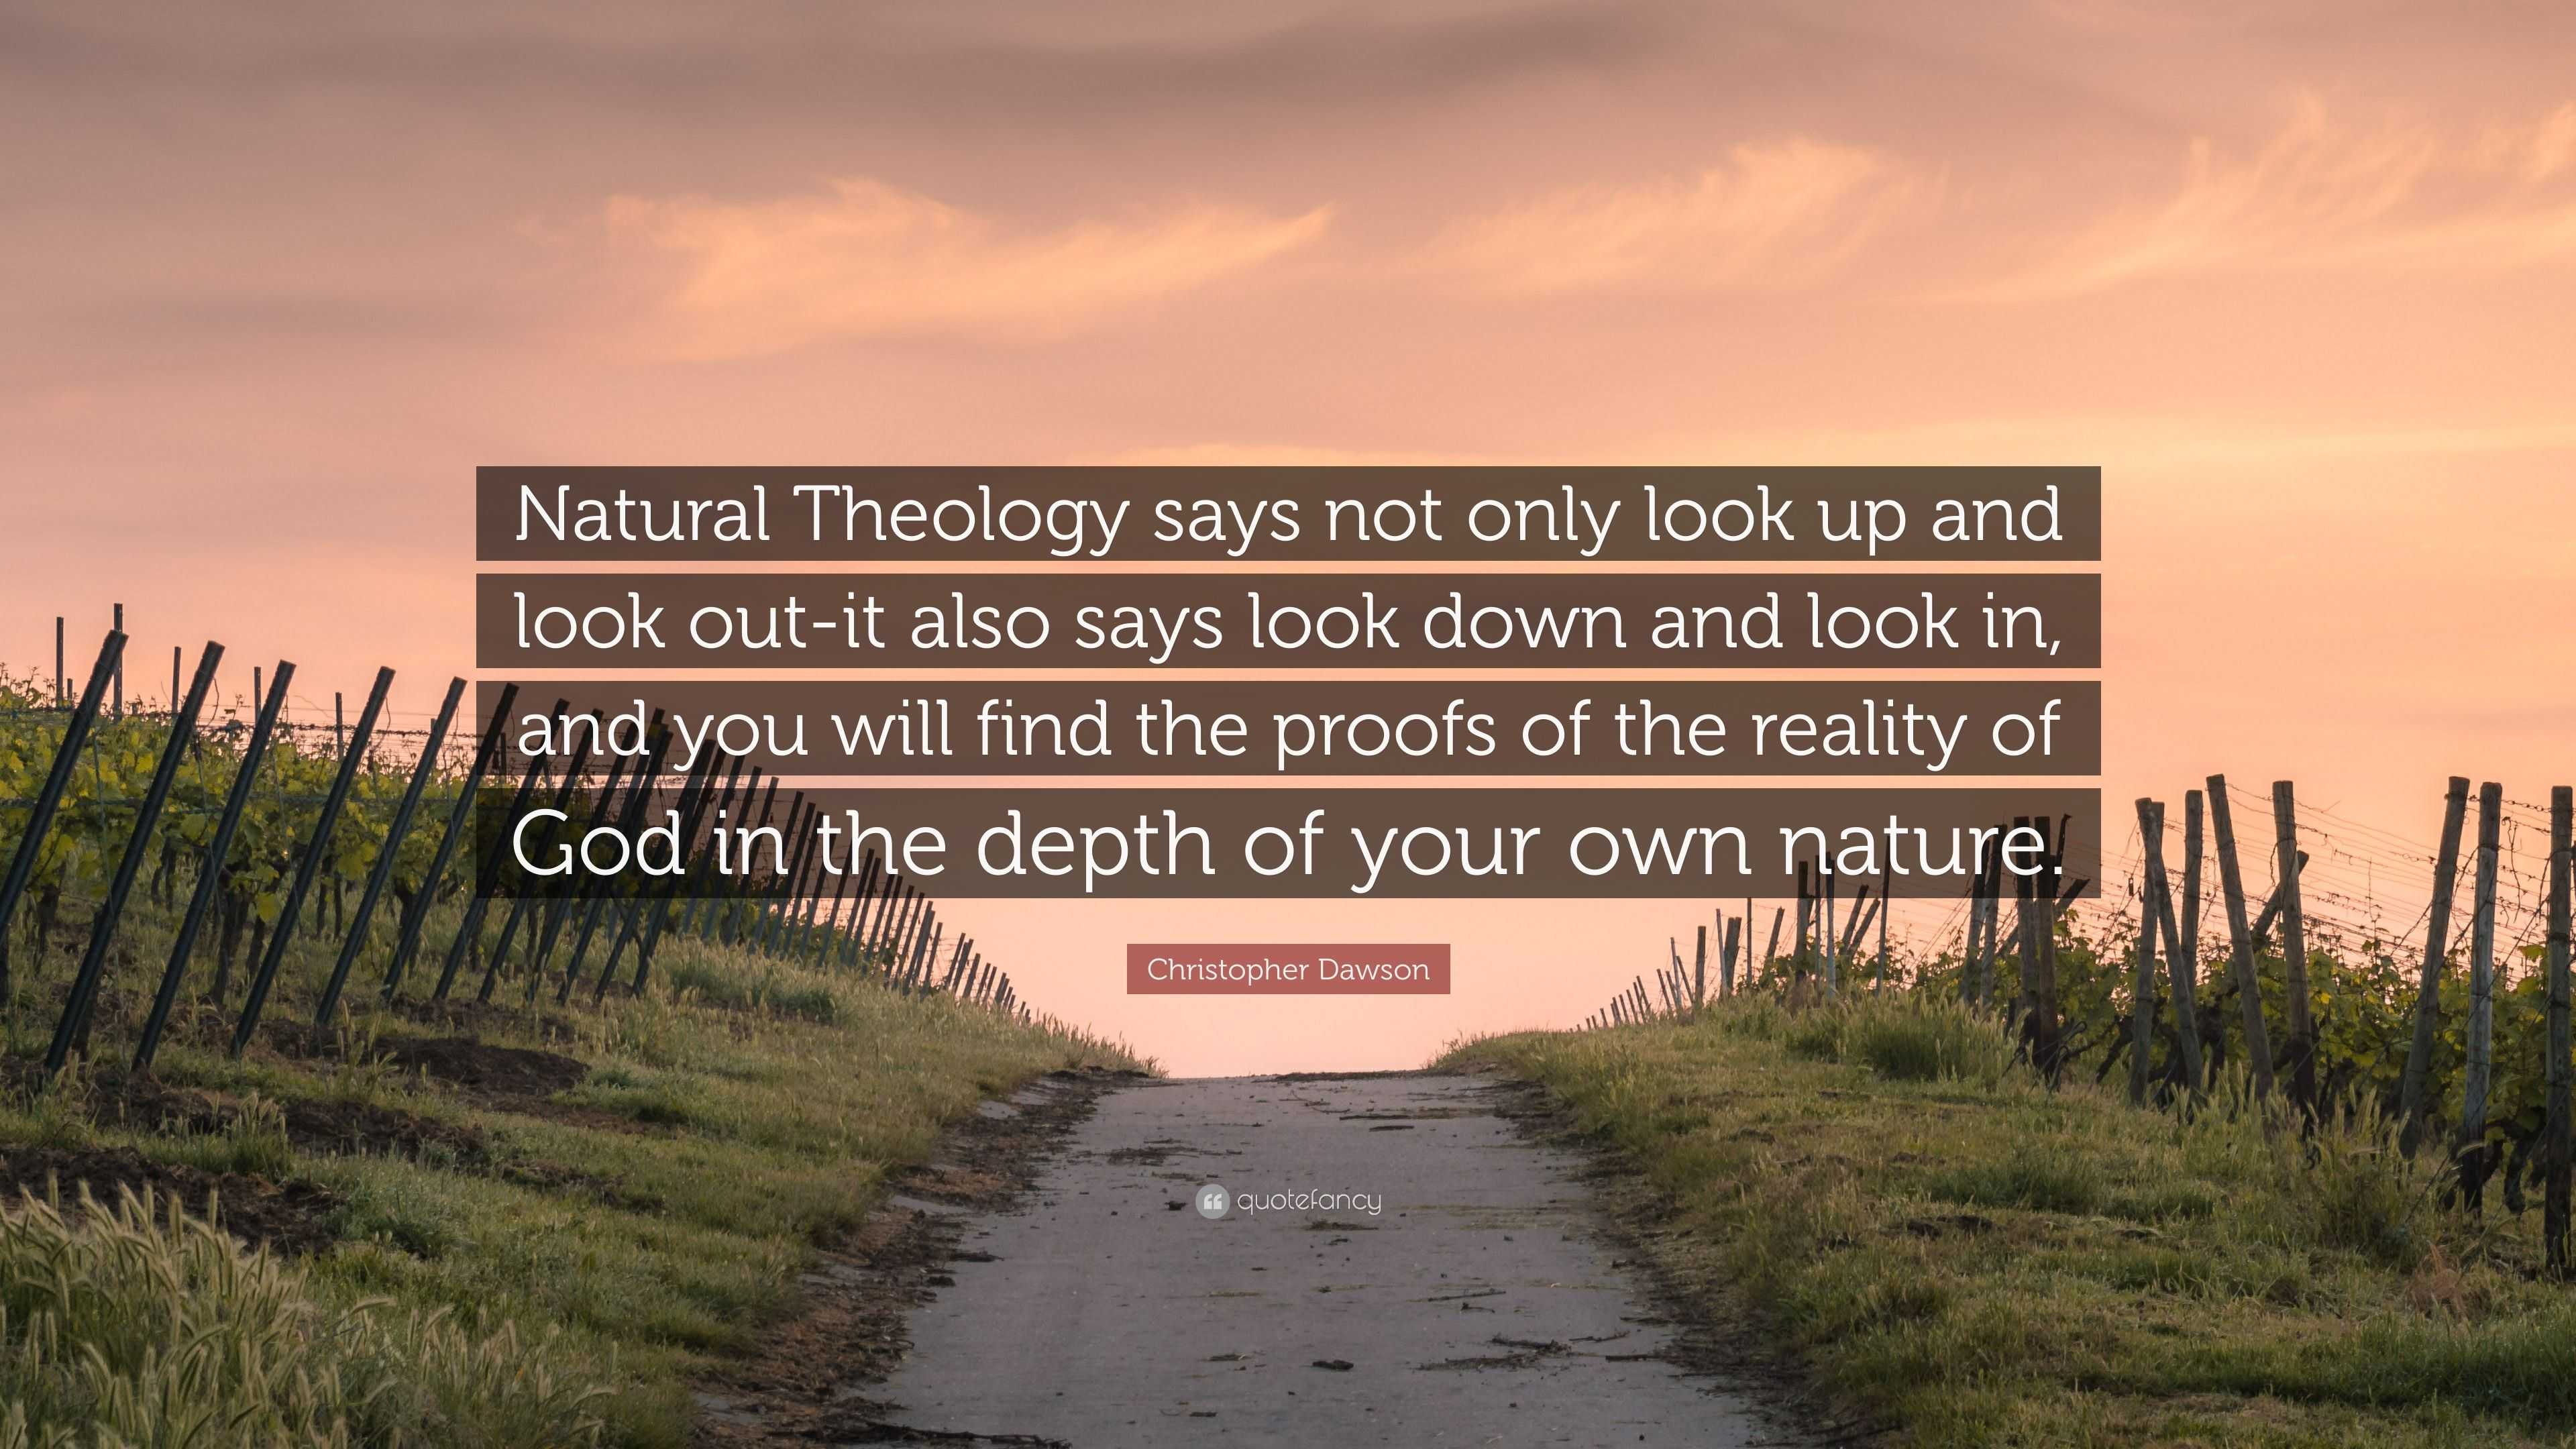 Christopher Dawson Quote Natural Theology Says Not Only Look Up And Look Out It Also Says Look Down And Look In And You Will Find The Proofs Of